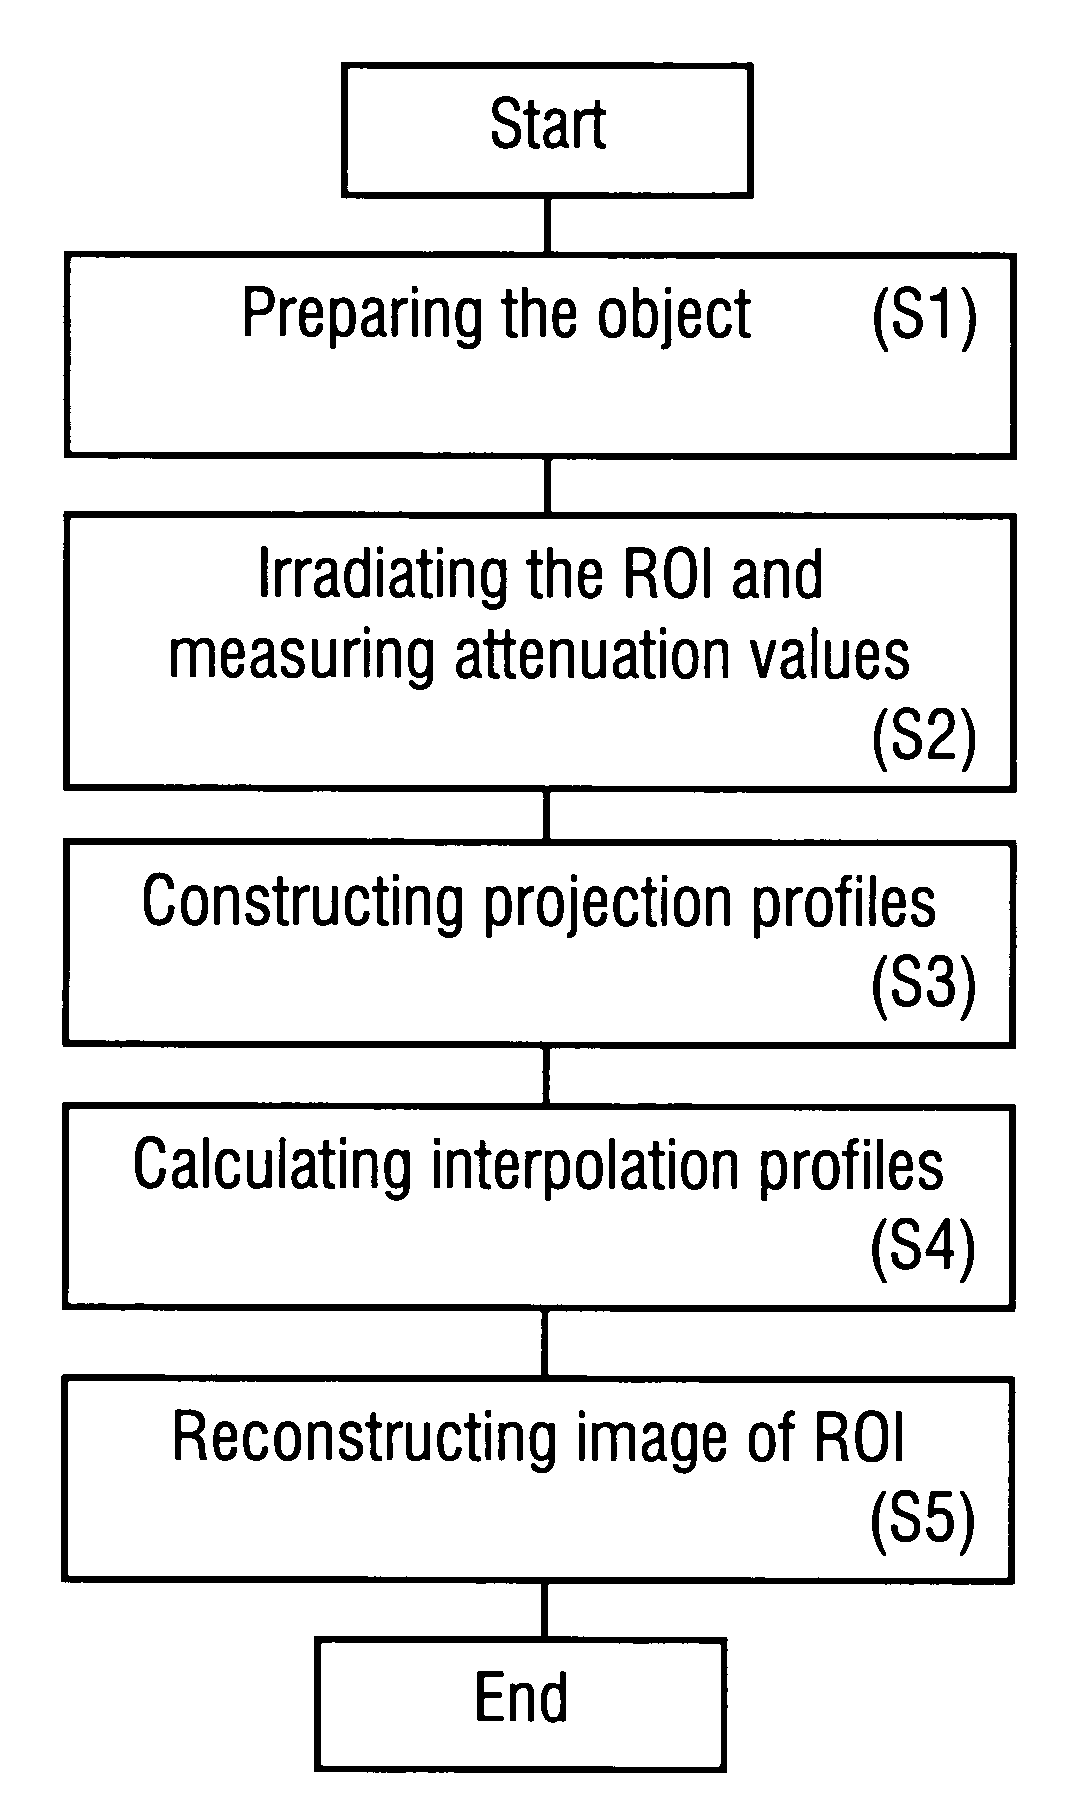 Method of reconstructing an image function from radon data